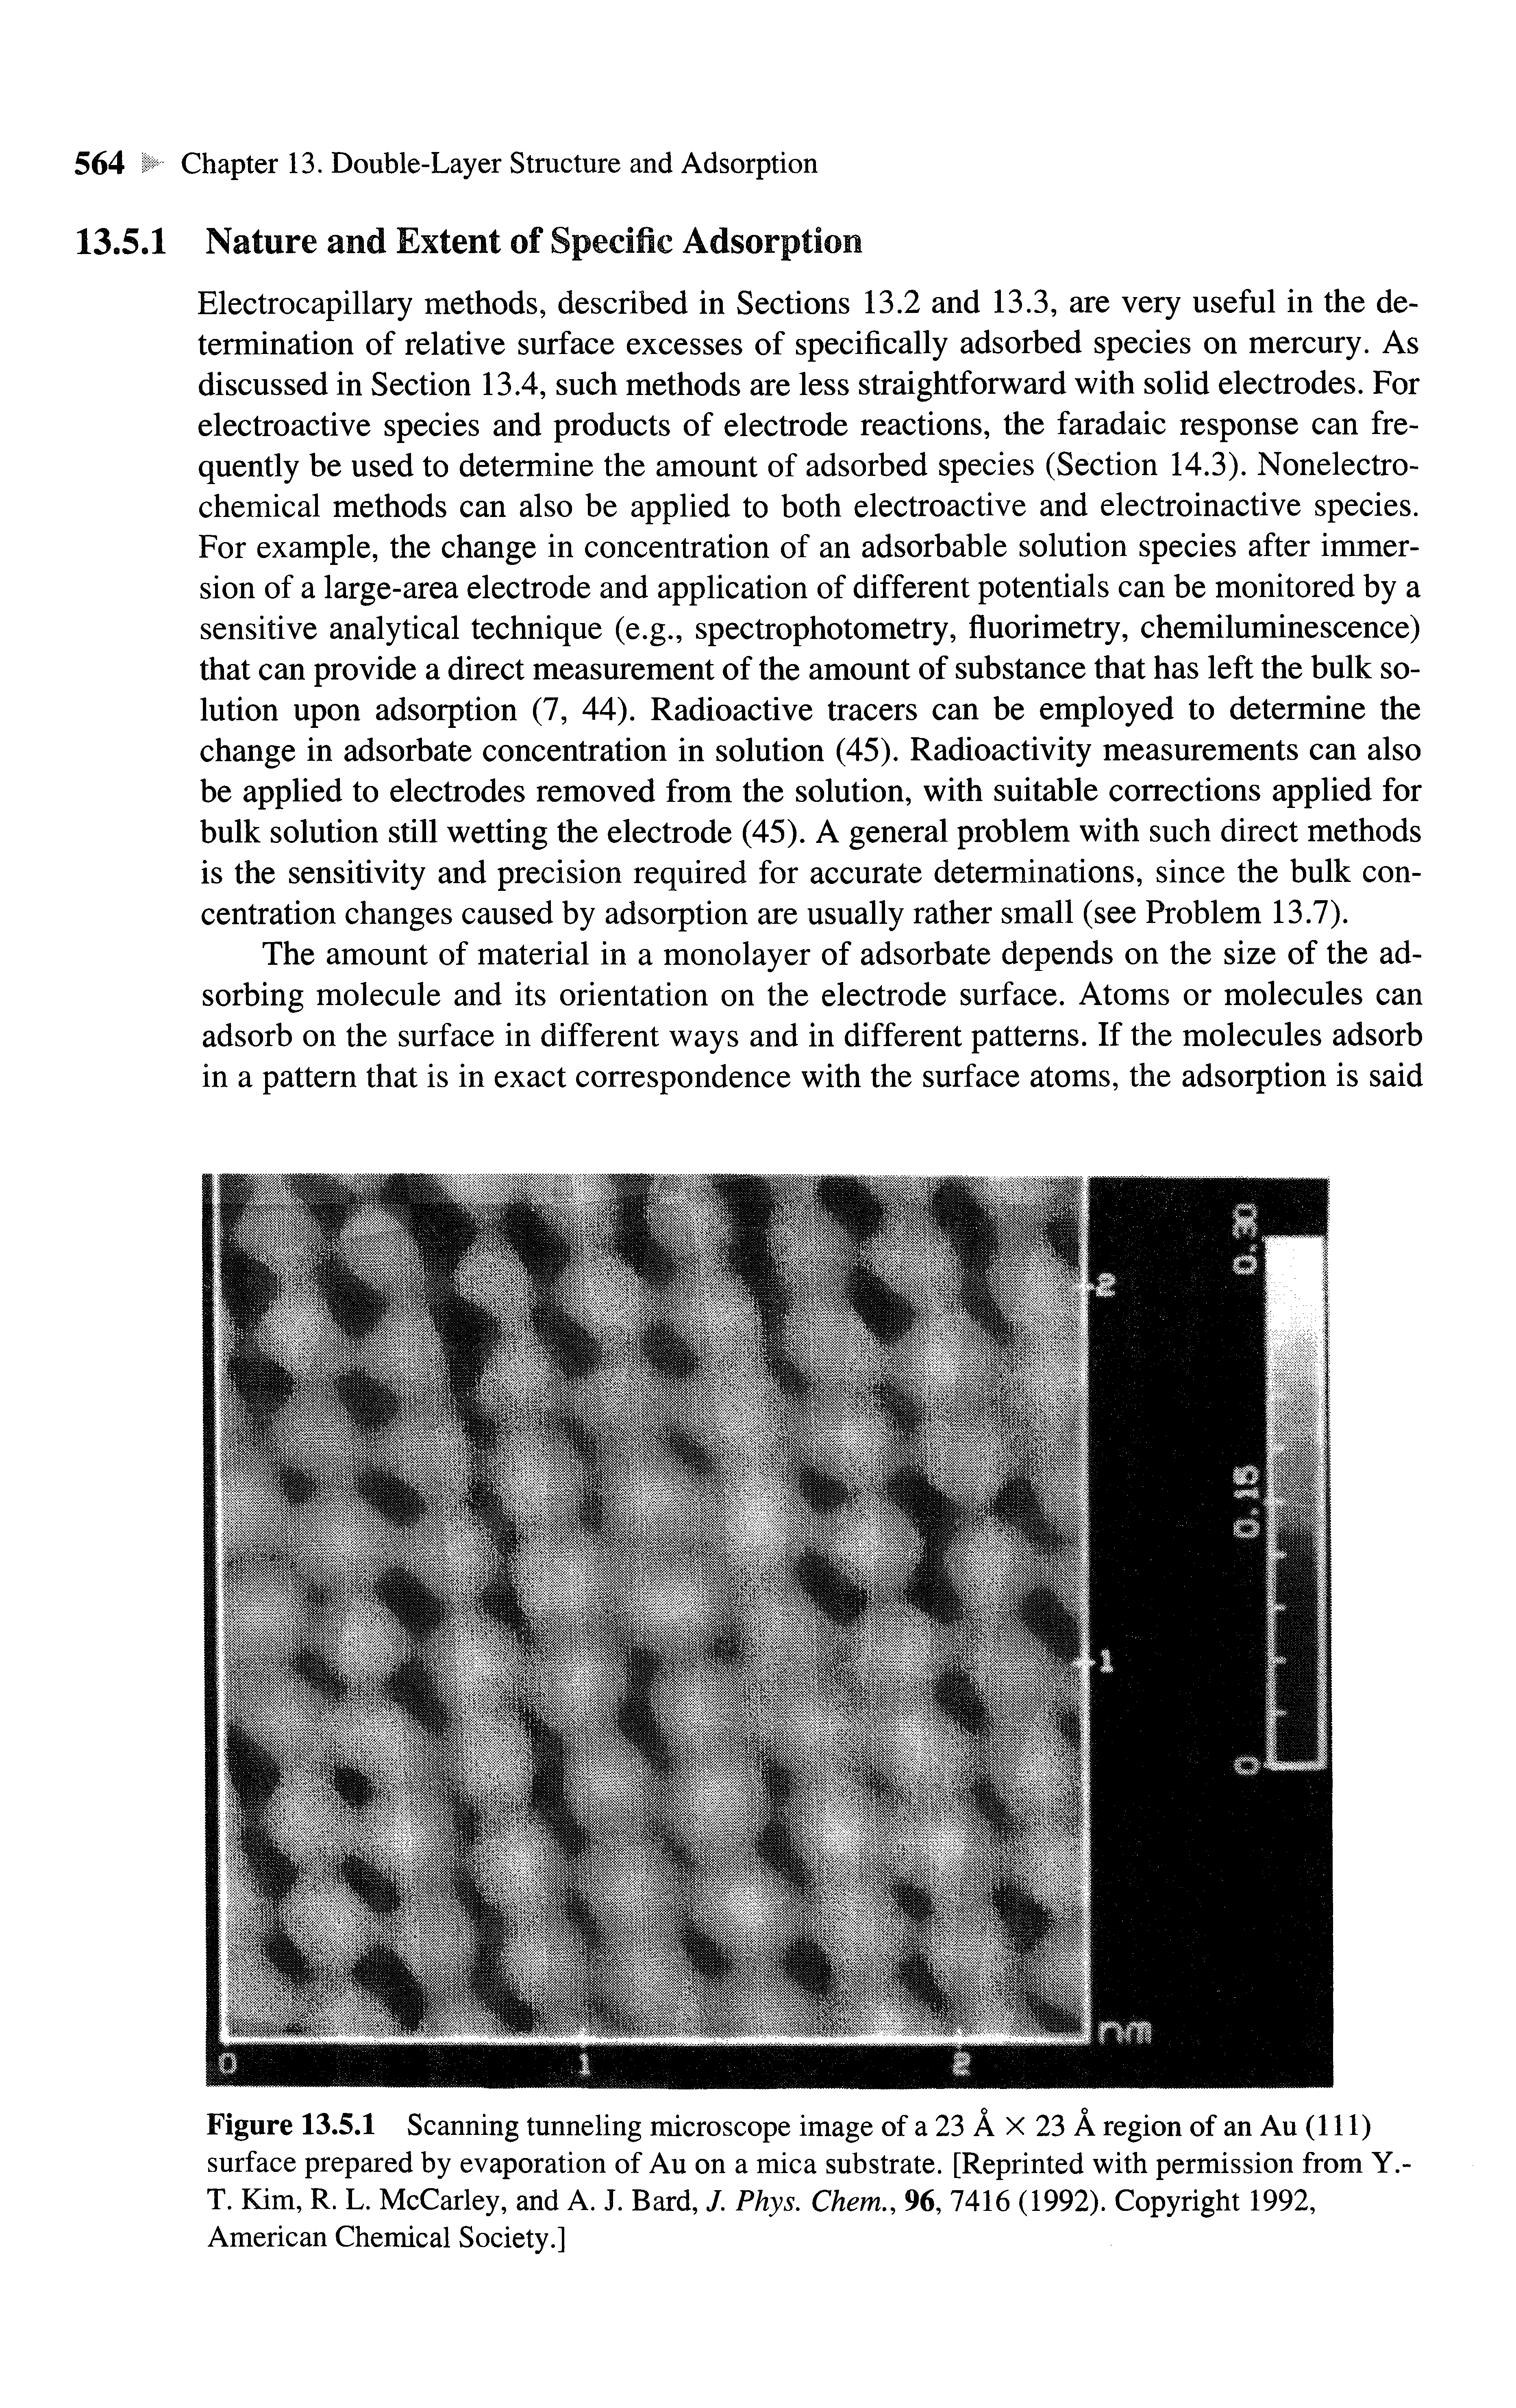 Figure 13.5.1 Scanning tunneling microscope image of a 23 A X 23 A region of an Au (111) surface prepared by evaporation of Au on a mica substrate. [Reprinted with permission from Y.-T. Kim, R. L. McCarley, and A. J. Bard, J. Phys. Chem., 96, 7416 (1992). Copyright 1992, American Chemical Society.]...